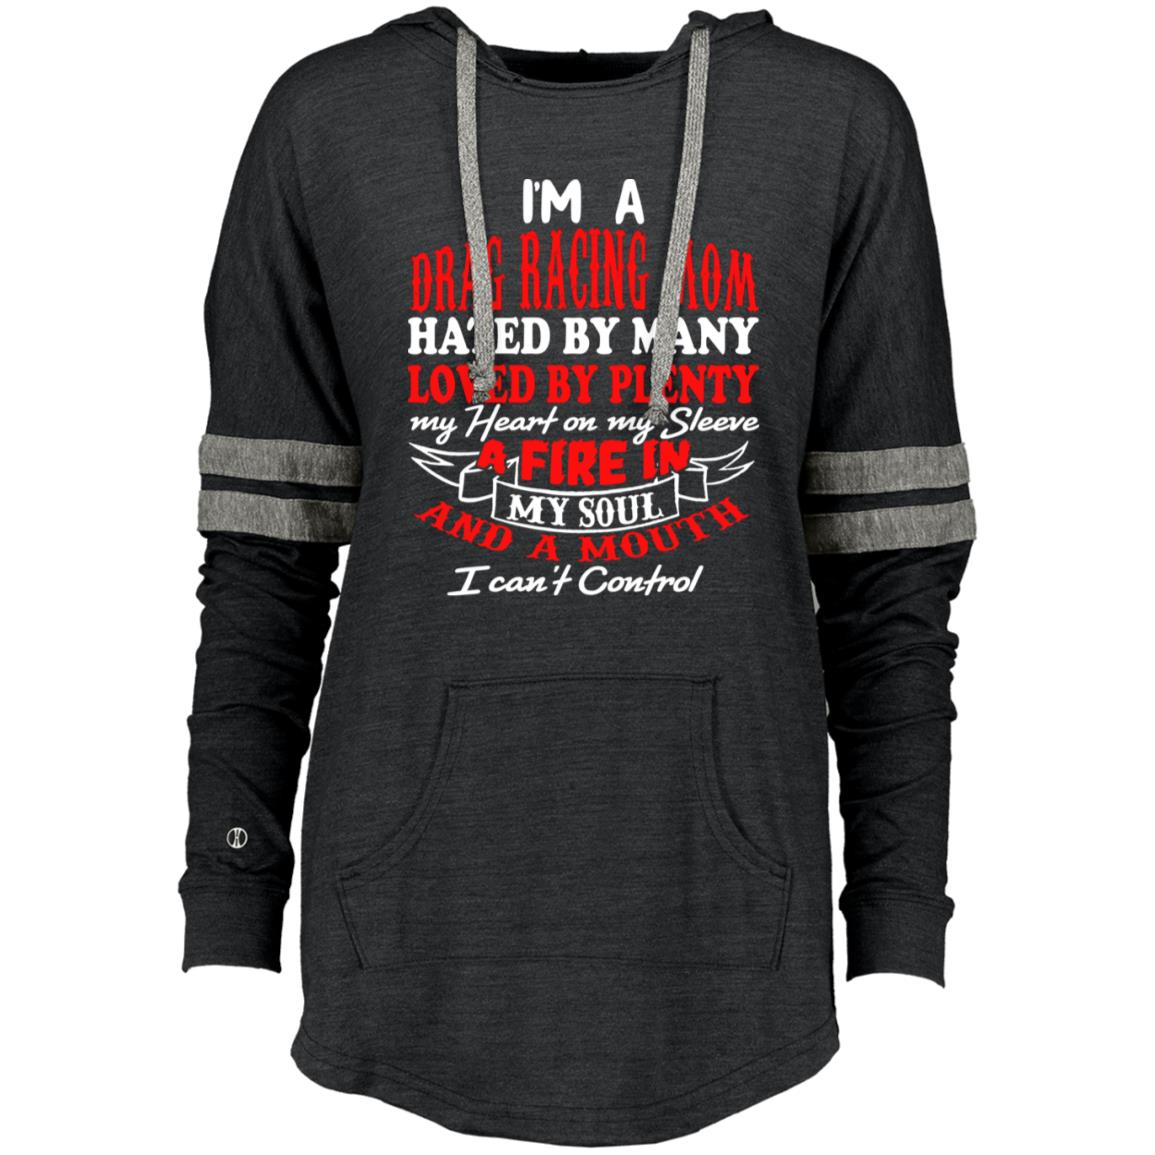 I'm A Drag Racing Mom Hated By Many Loved By Plenty Ladies Hooded Low Key Pullover